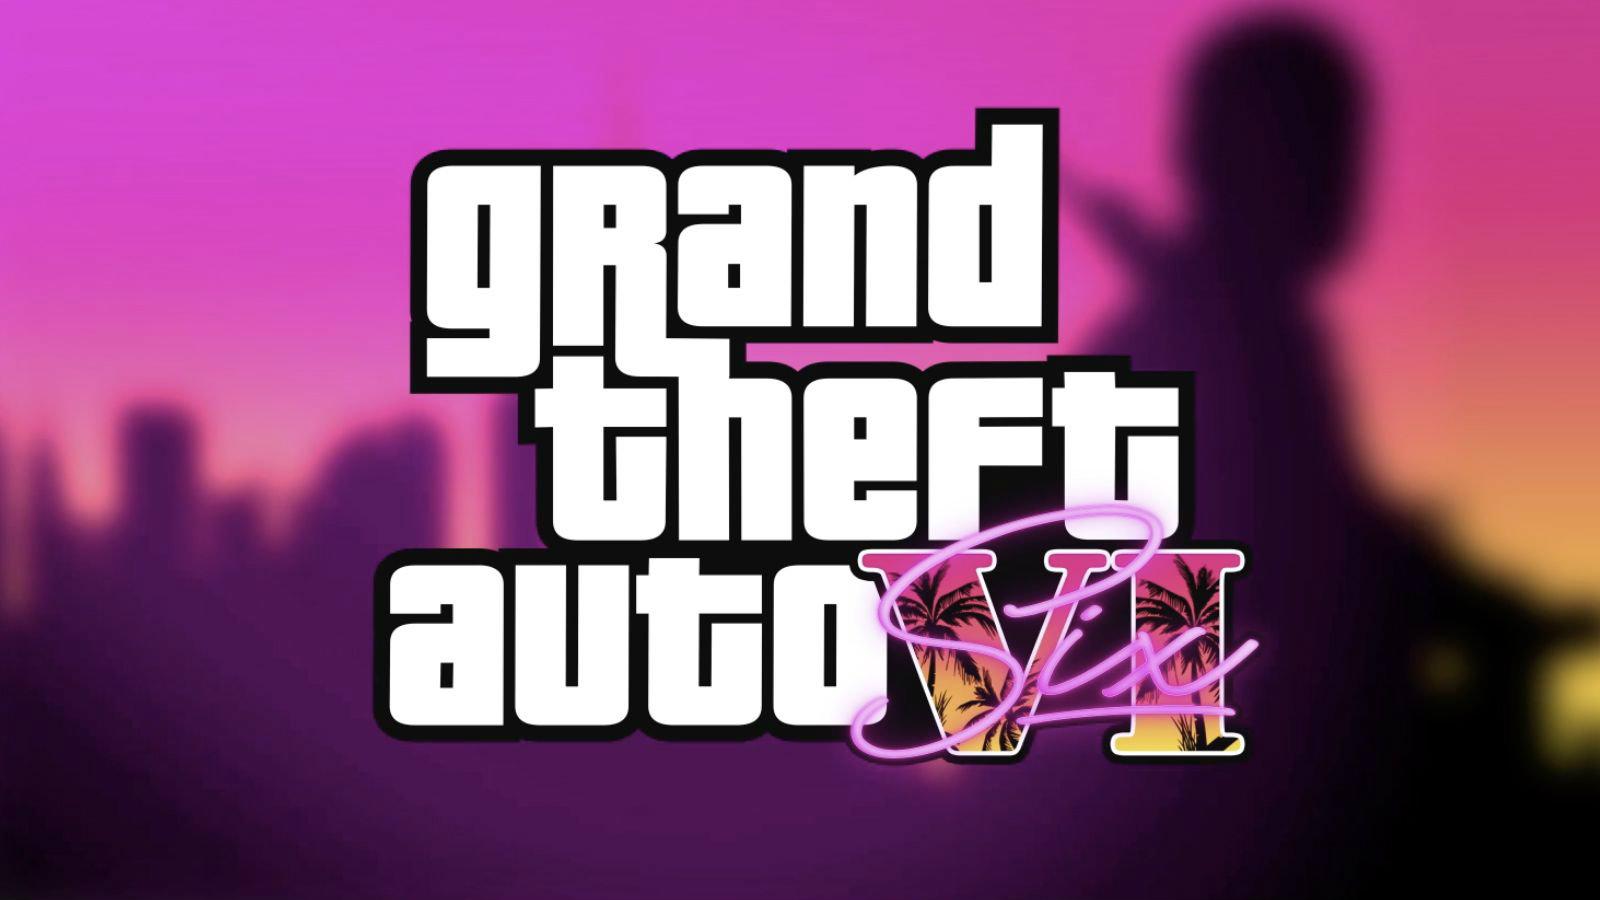 Further Take-Two copyright notices fan GTA 3 remake rumors